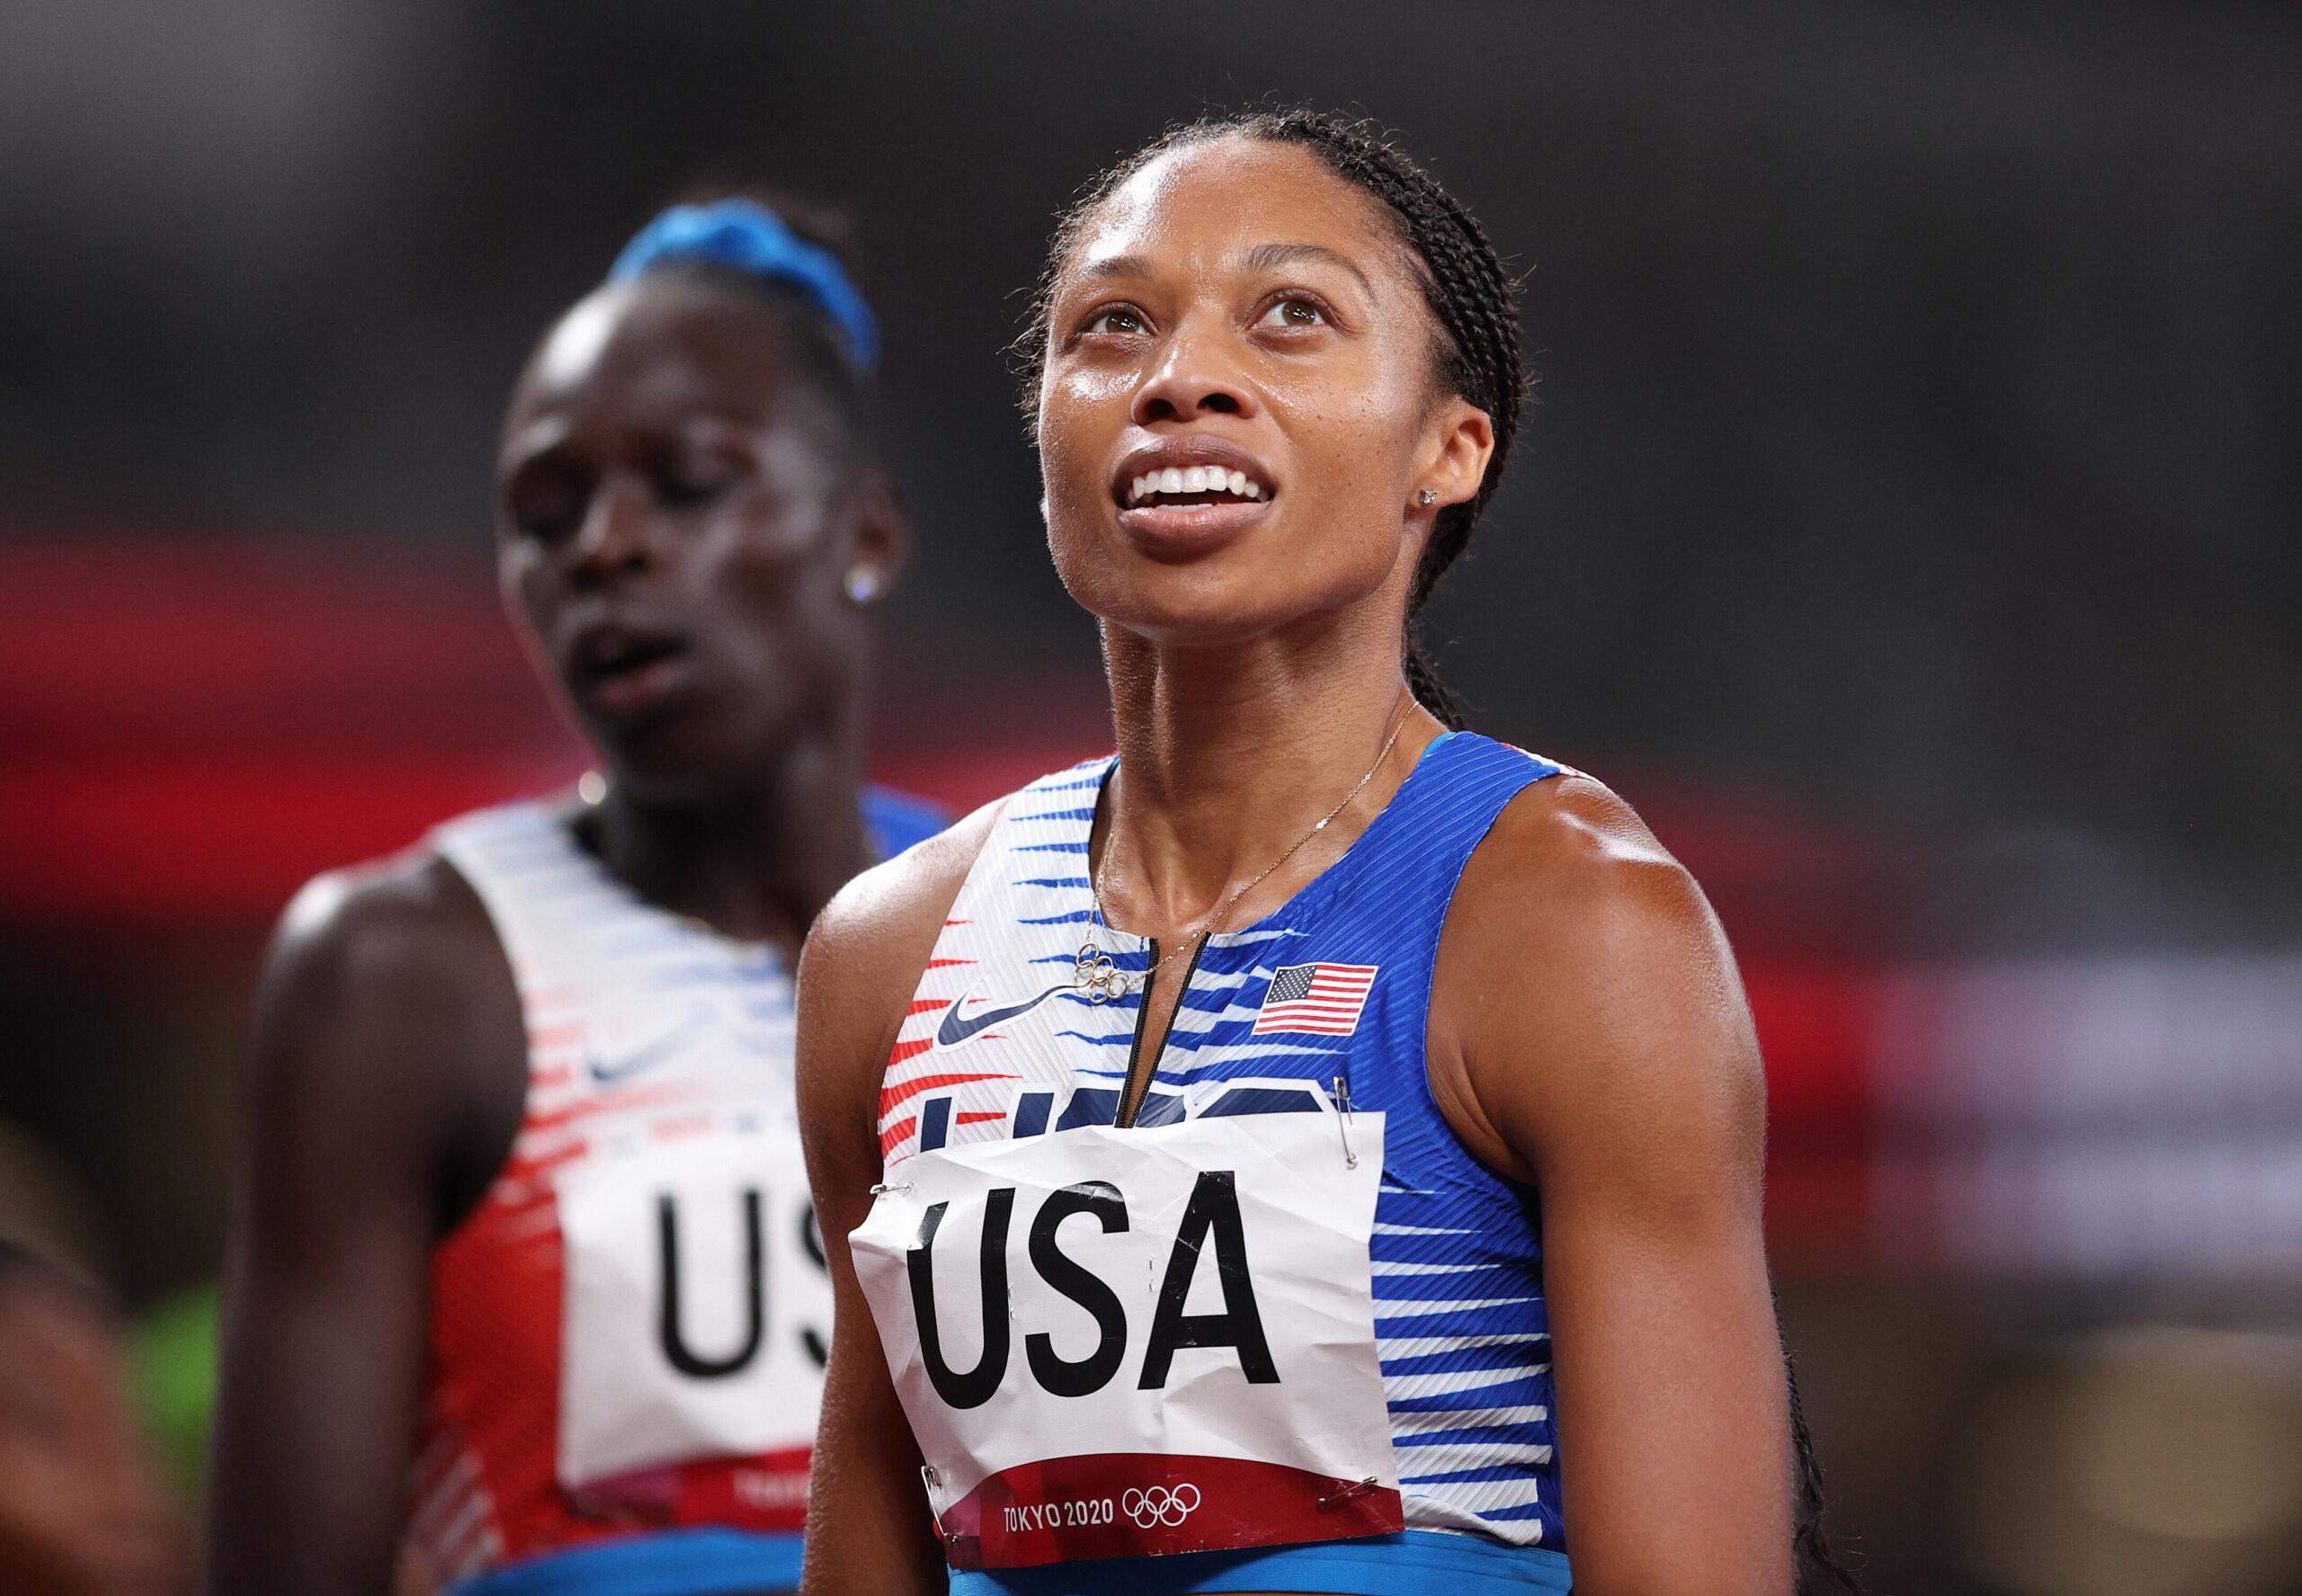 Allyson Felix reacts after winning the gold medal in the women' s 4 x 400m relay final at Tokyo 2020.